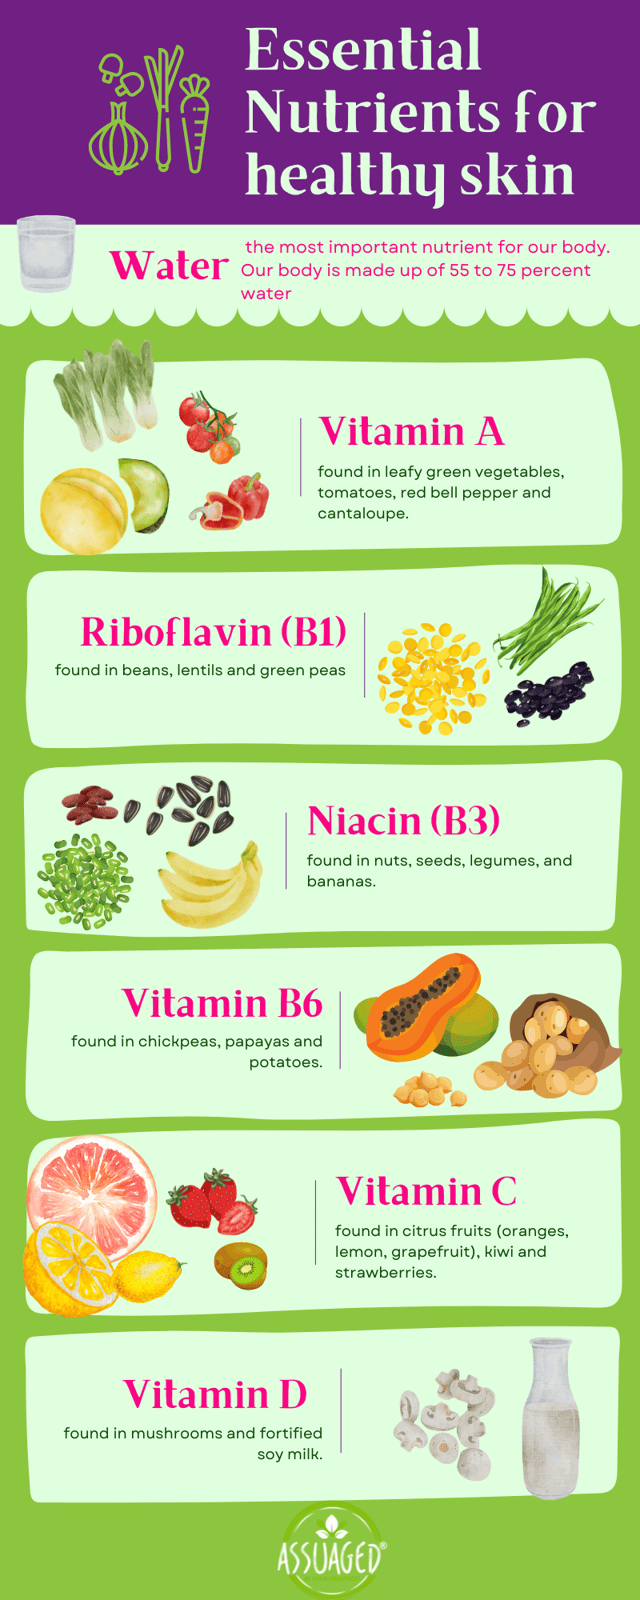 7 Essential Nutrients for healthy skin